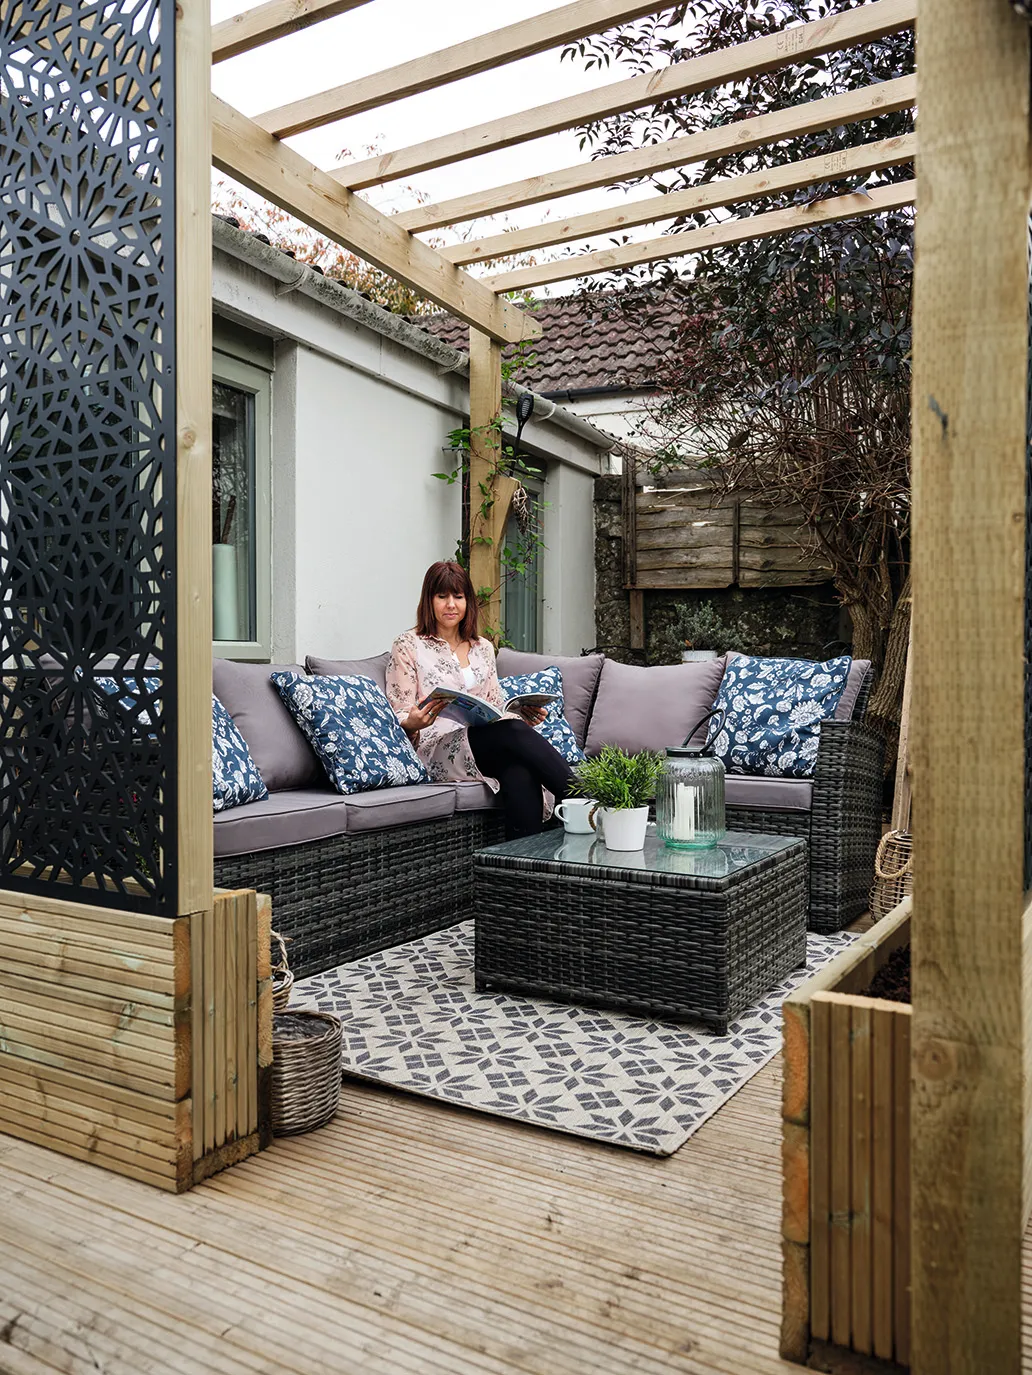 Gary built the decking area from scratch, using leftover decking boards and offcut decorative screens